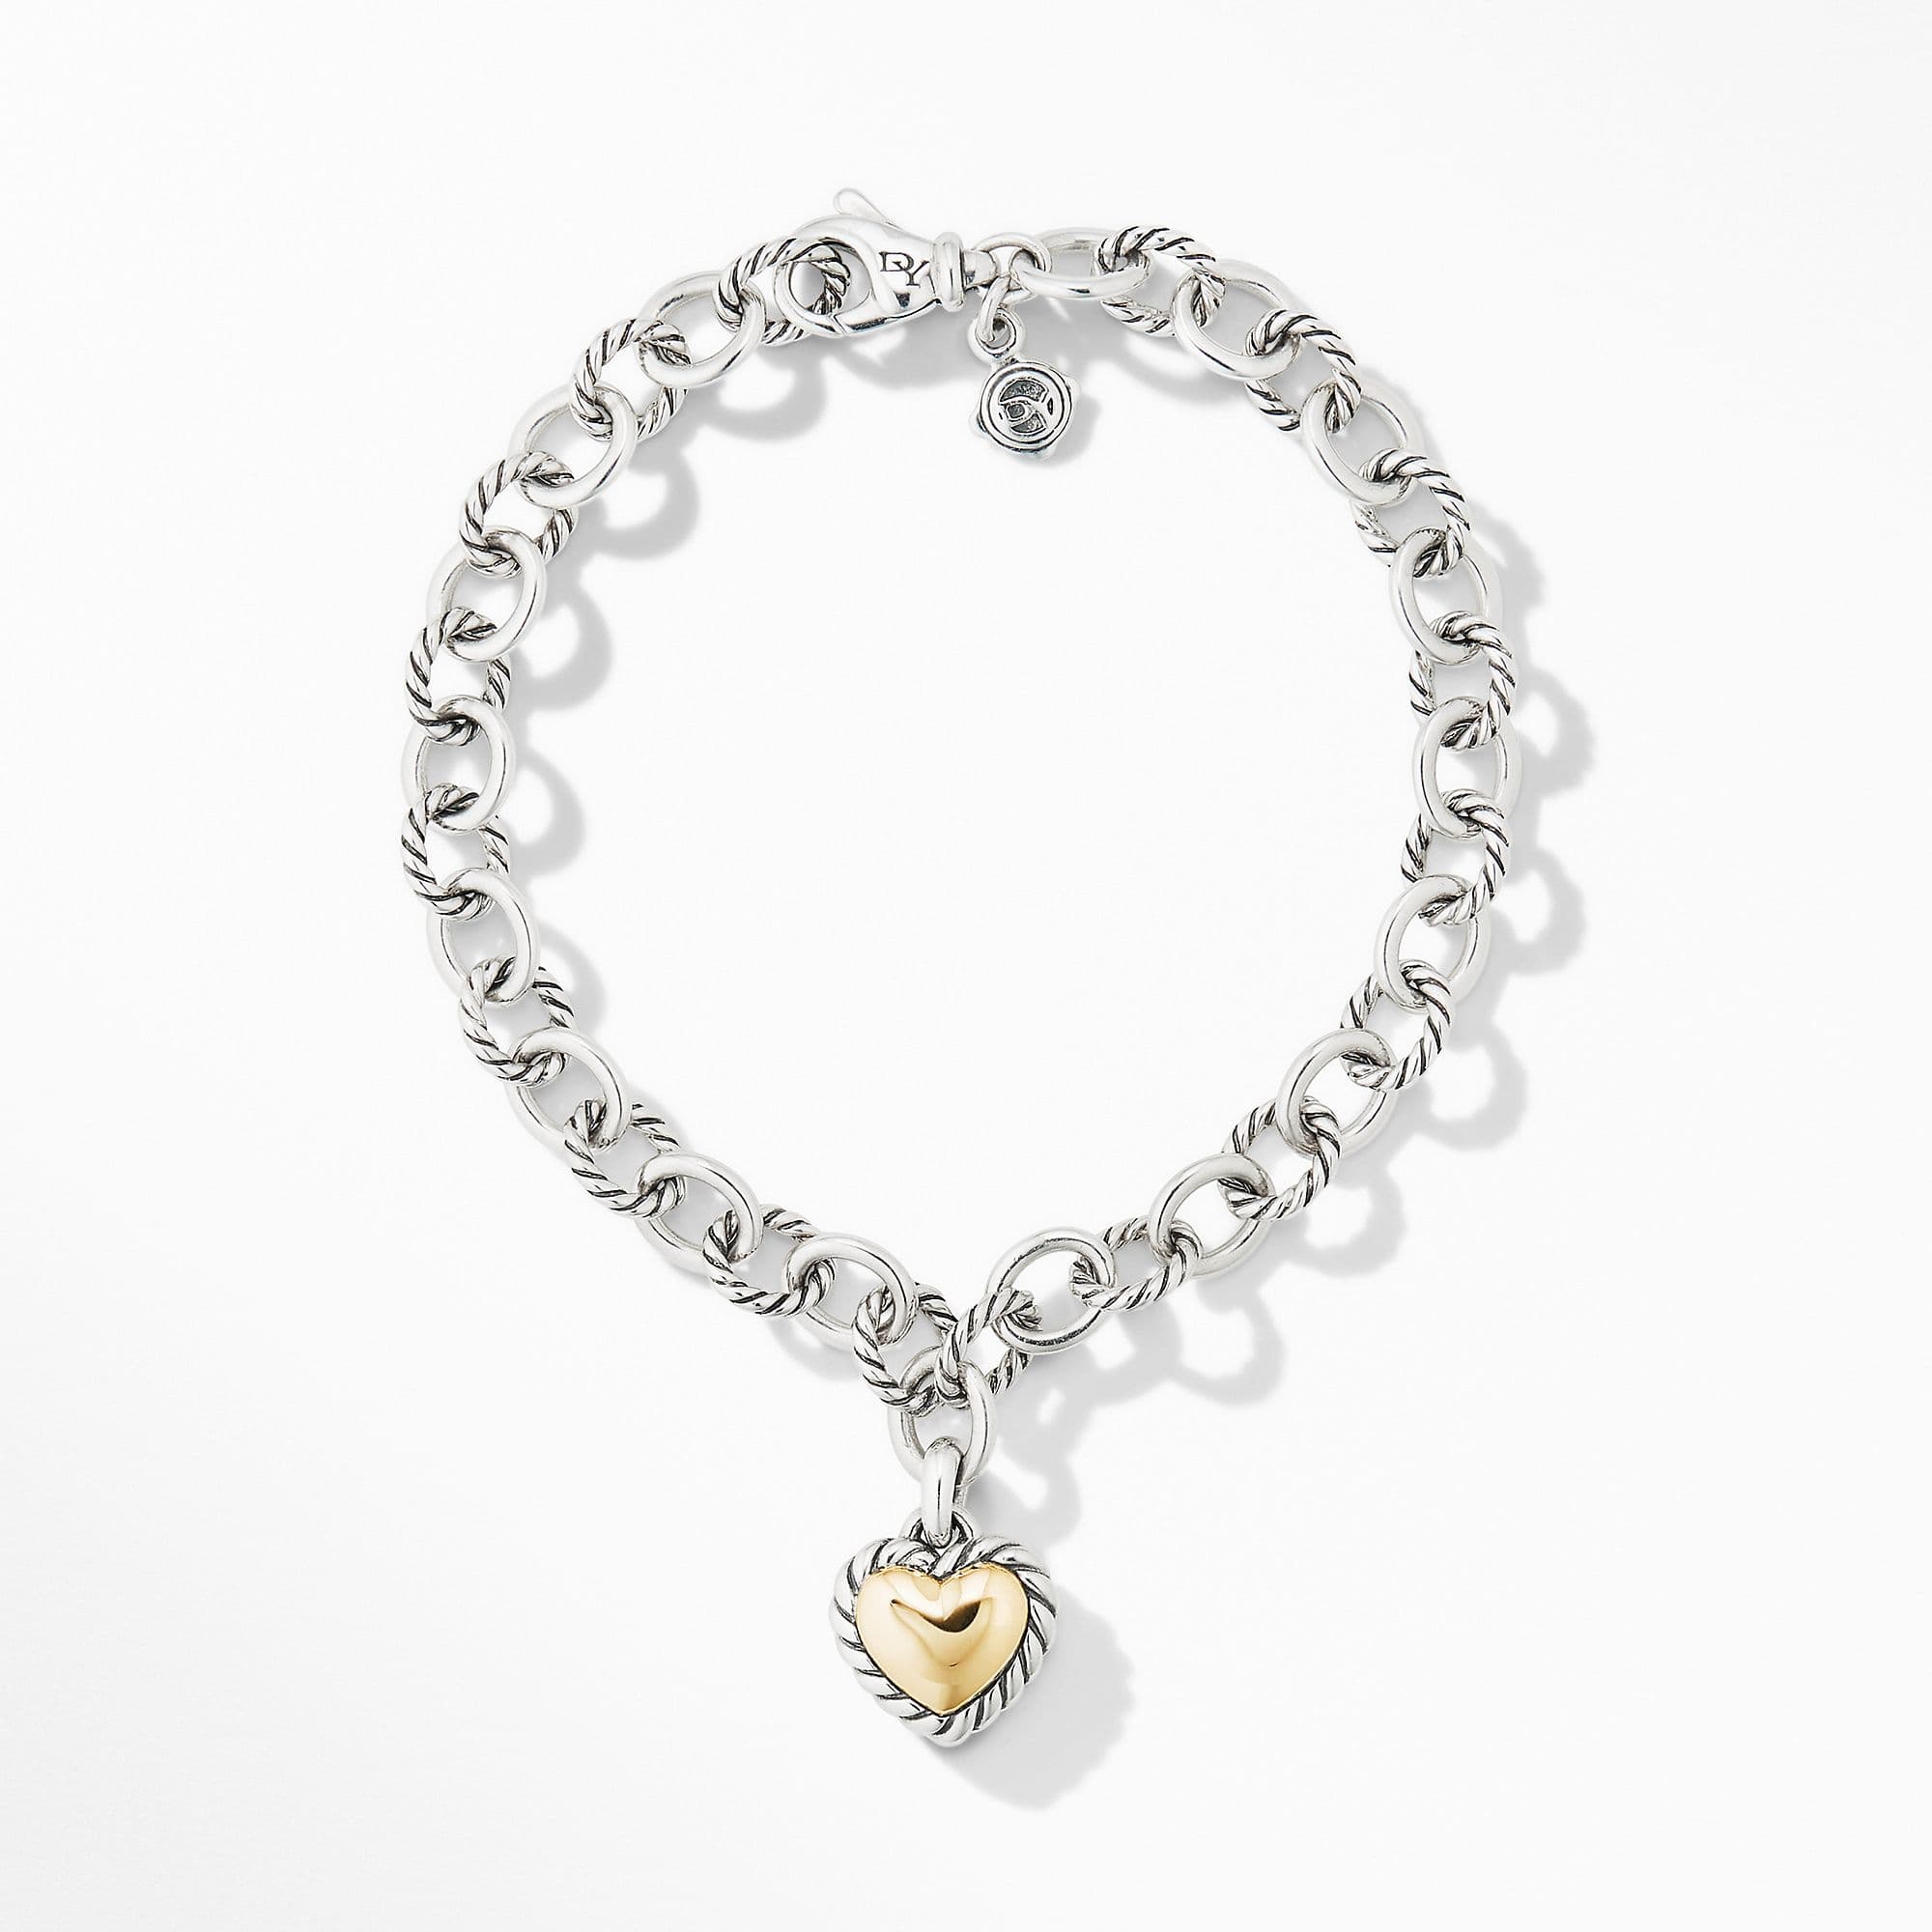 Classic Heart Charm in Sterling Silver